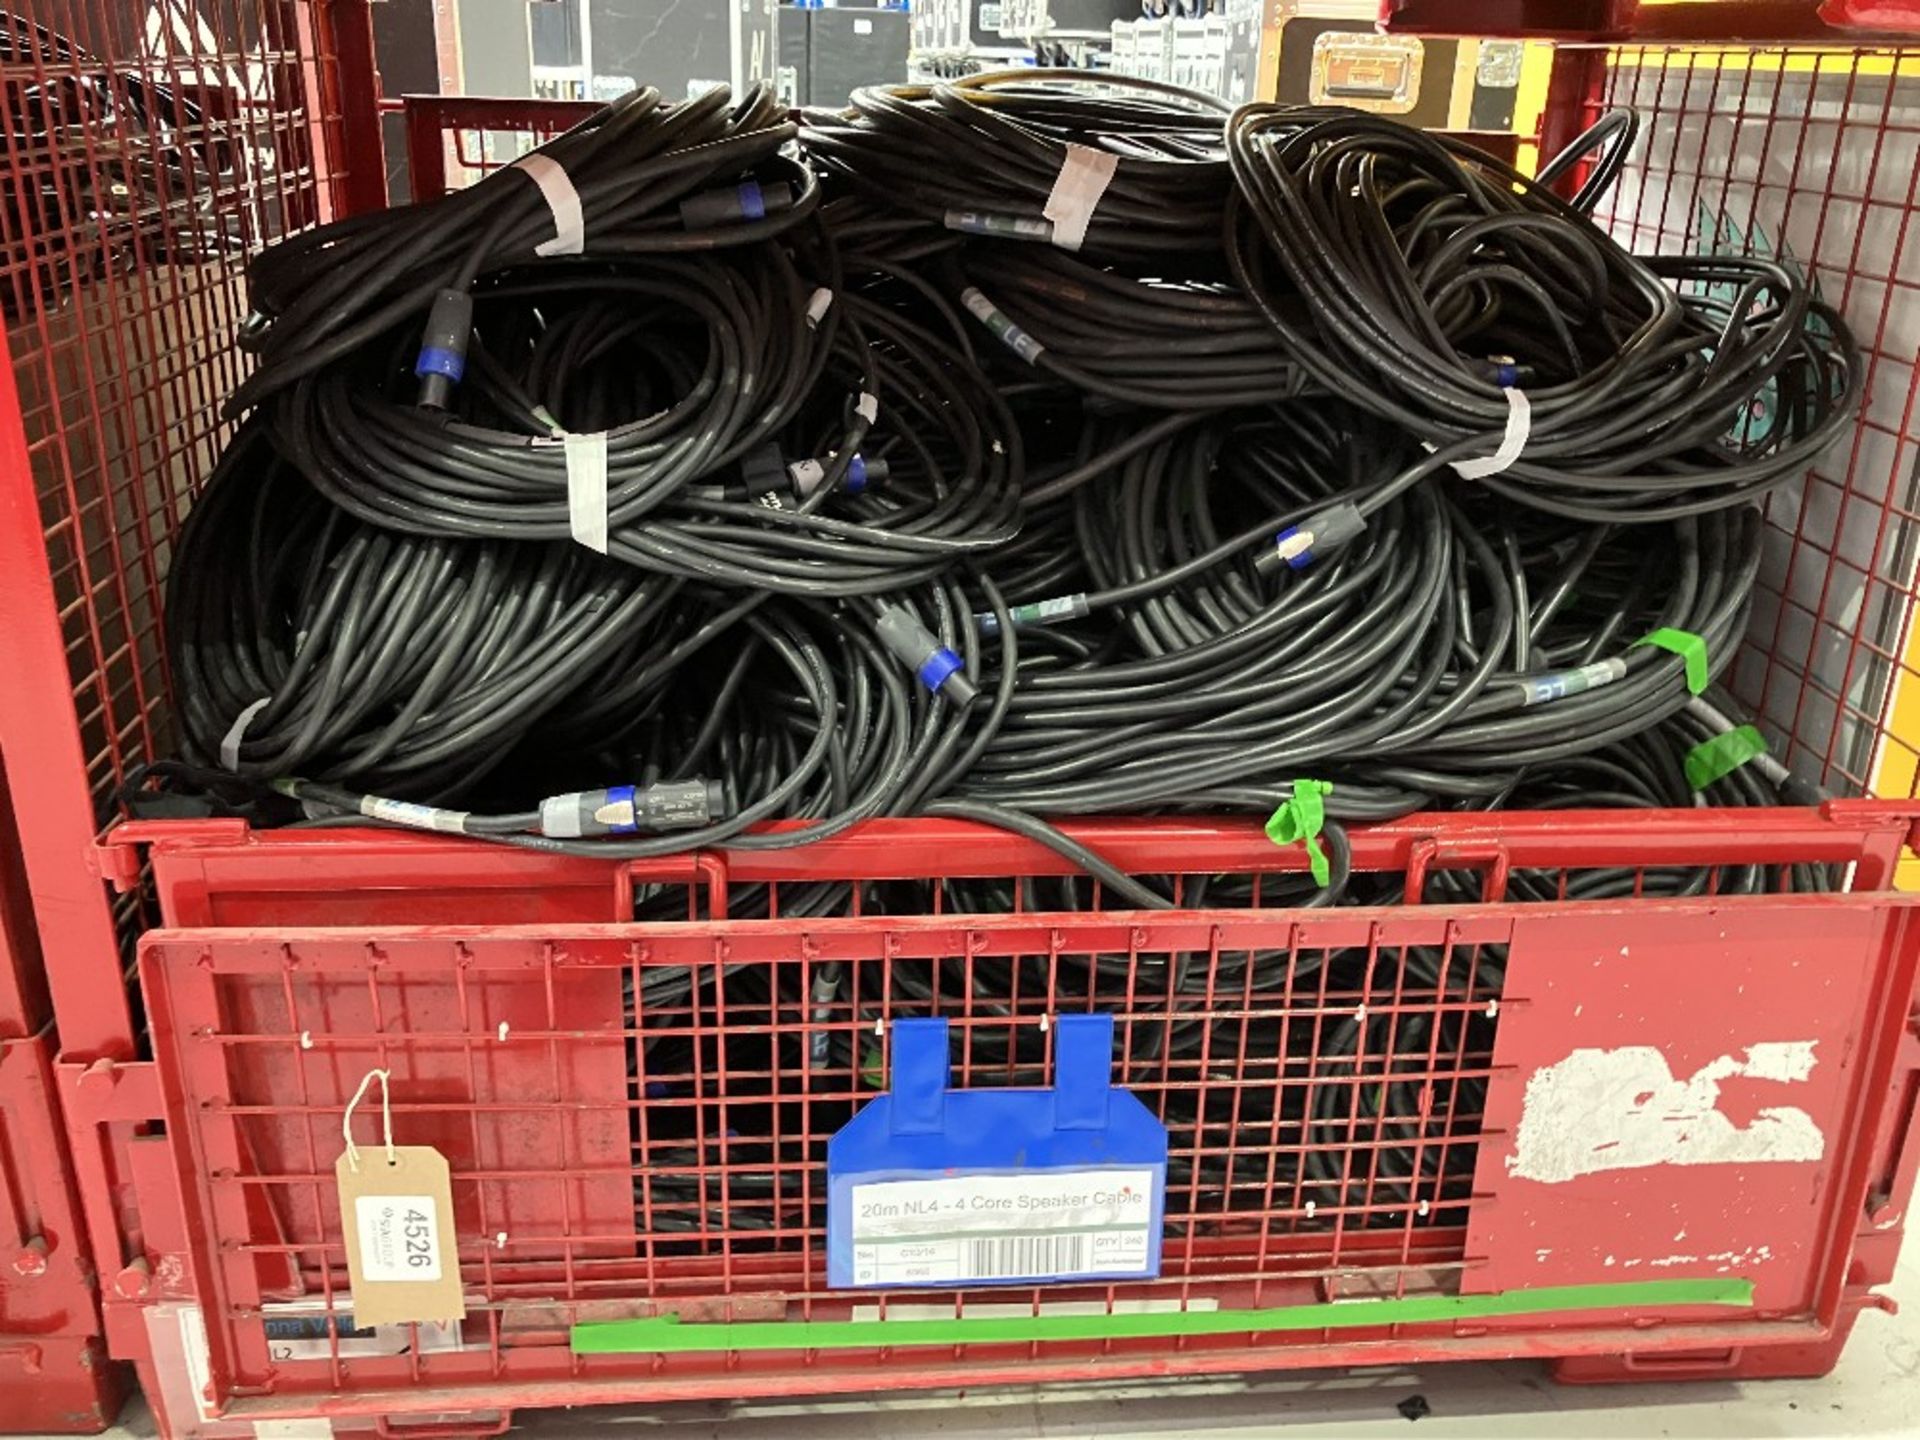 Large Quantity of 20m NL4-4 Core Speaker Cable with Steel Fabricated Stillage - Image 5 of 5